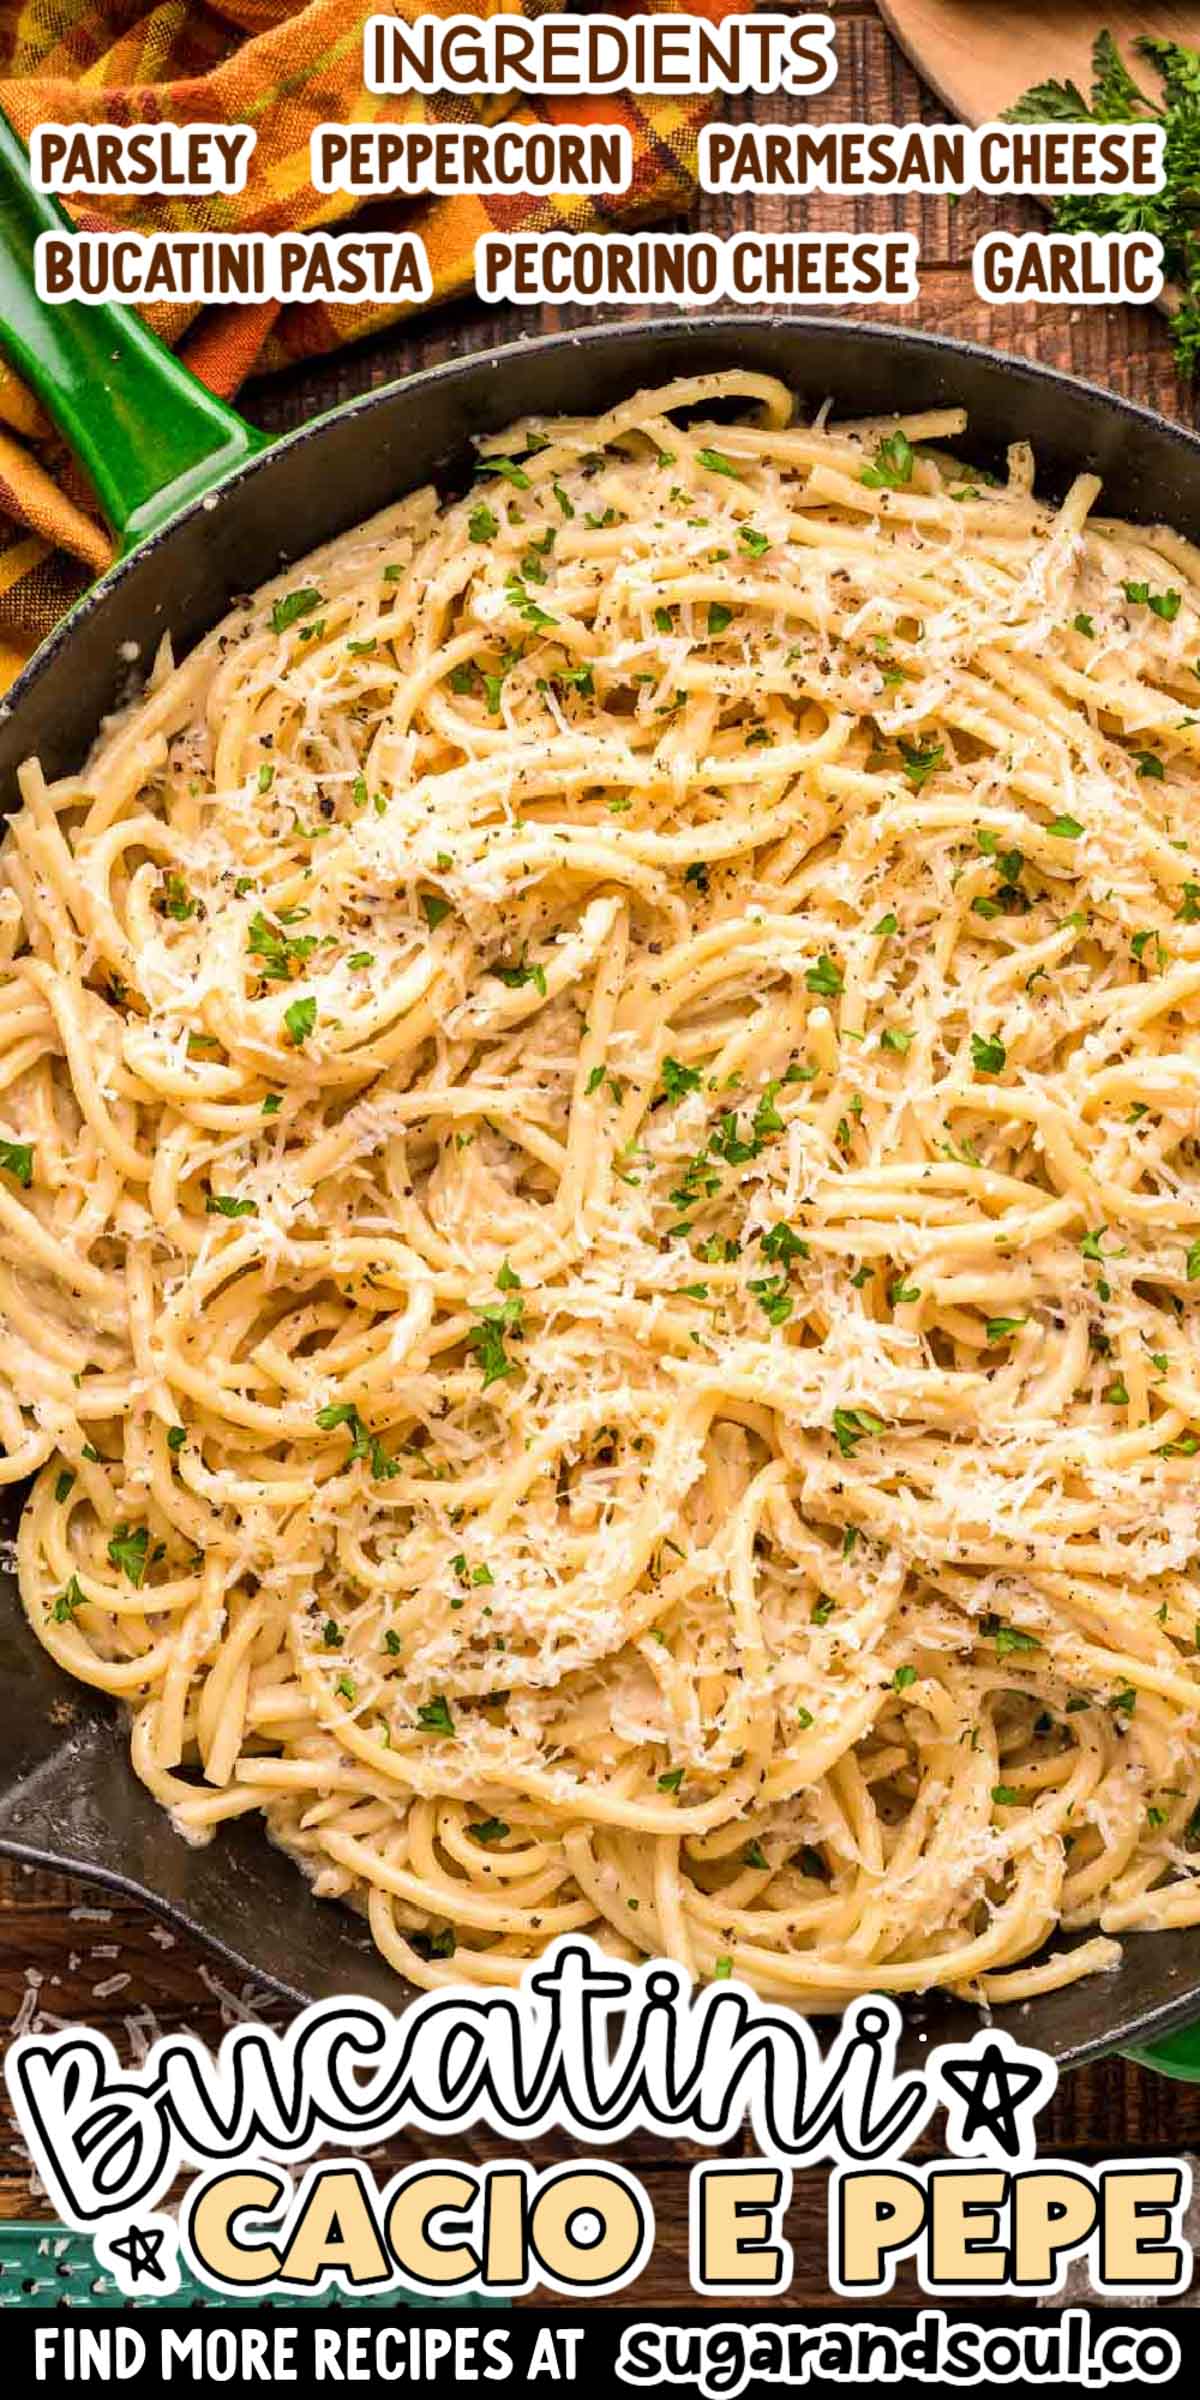 This Bucatini Cacio e Pepe is a classic Italian pasta dish that's made with thick pasta, two types of cheeses, and two other easy ingredients! Ready to enjoy in just 25 minutes from start to finish! via @sugarandsoulco